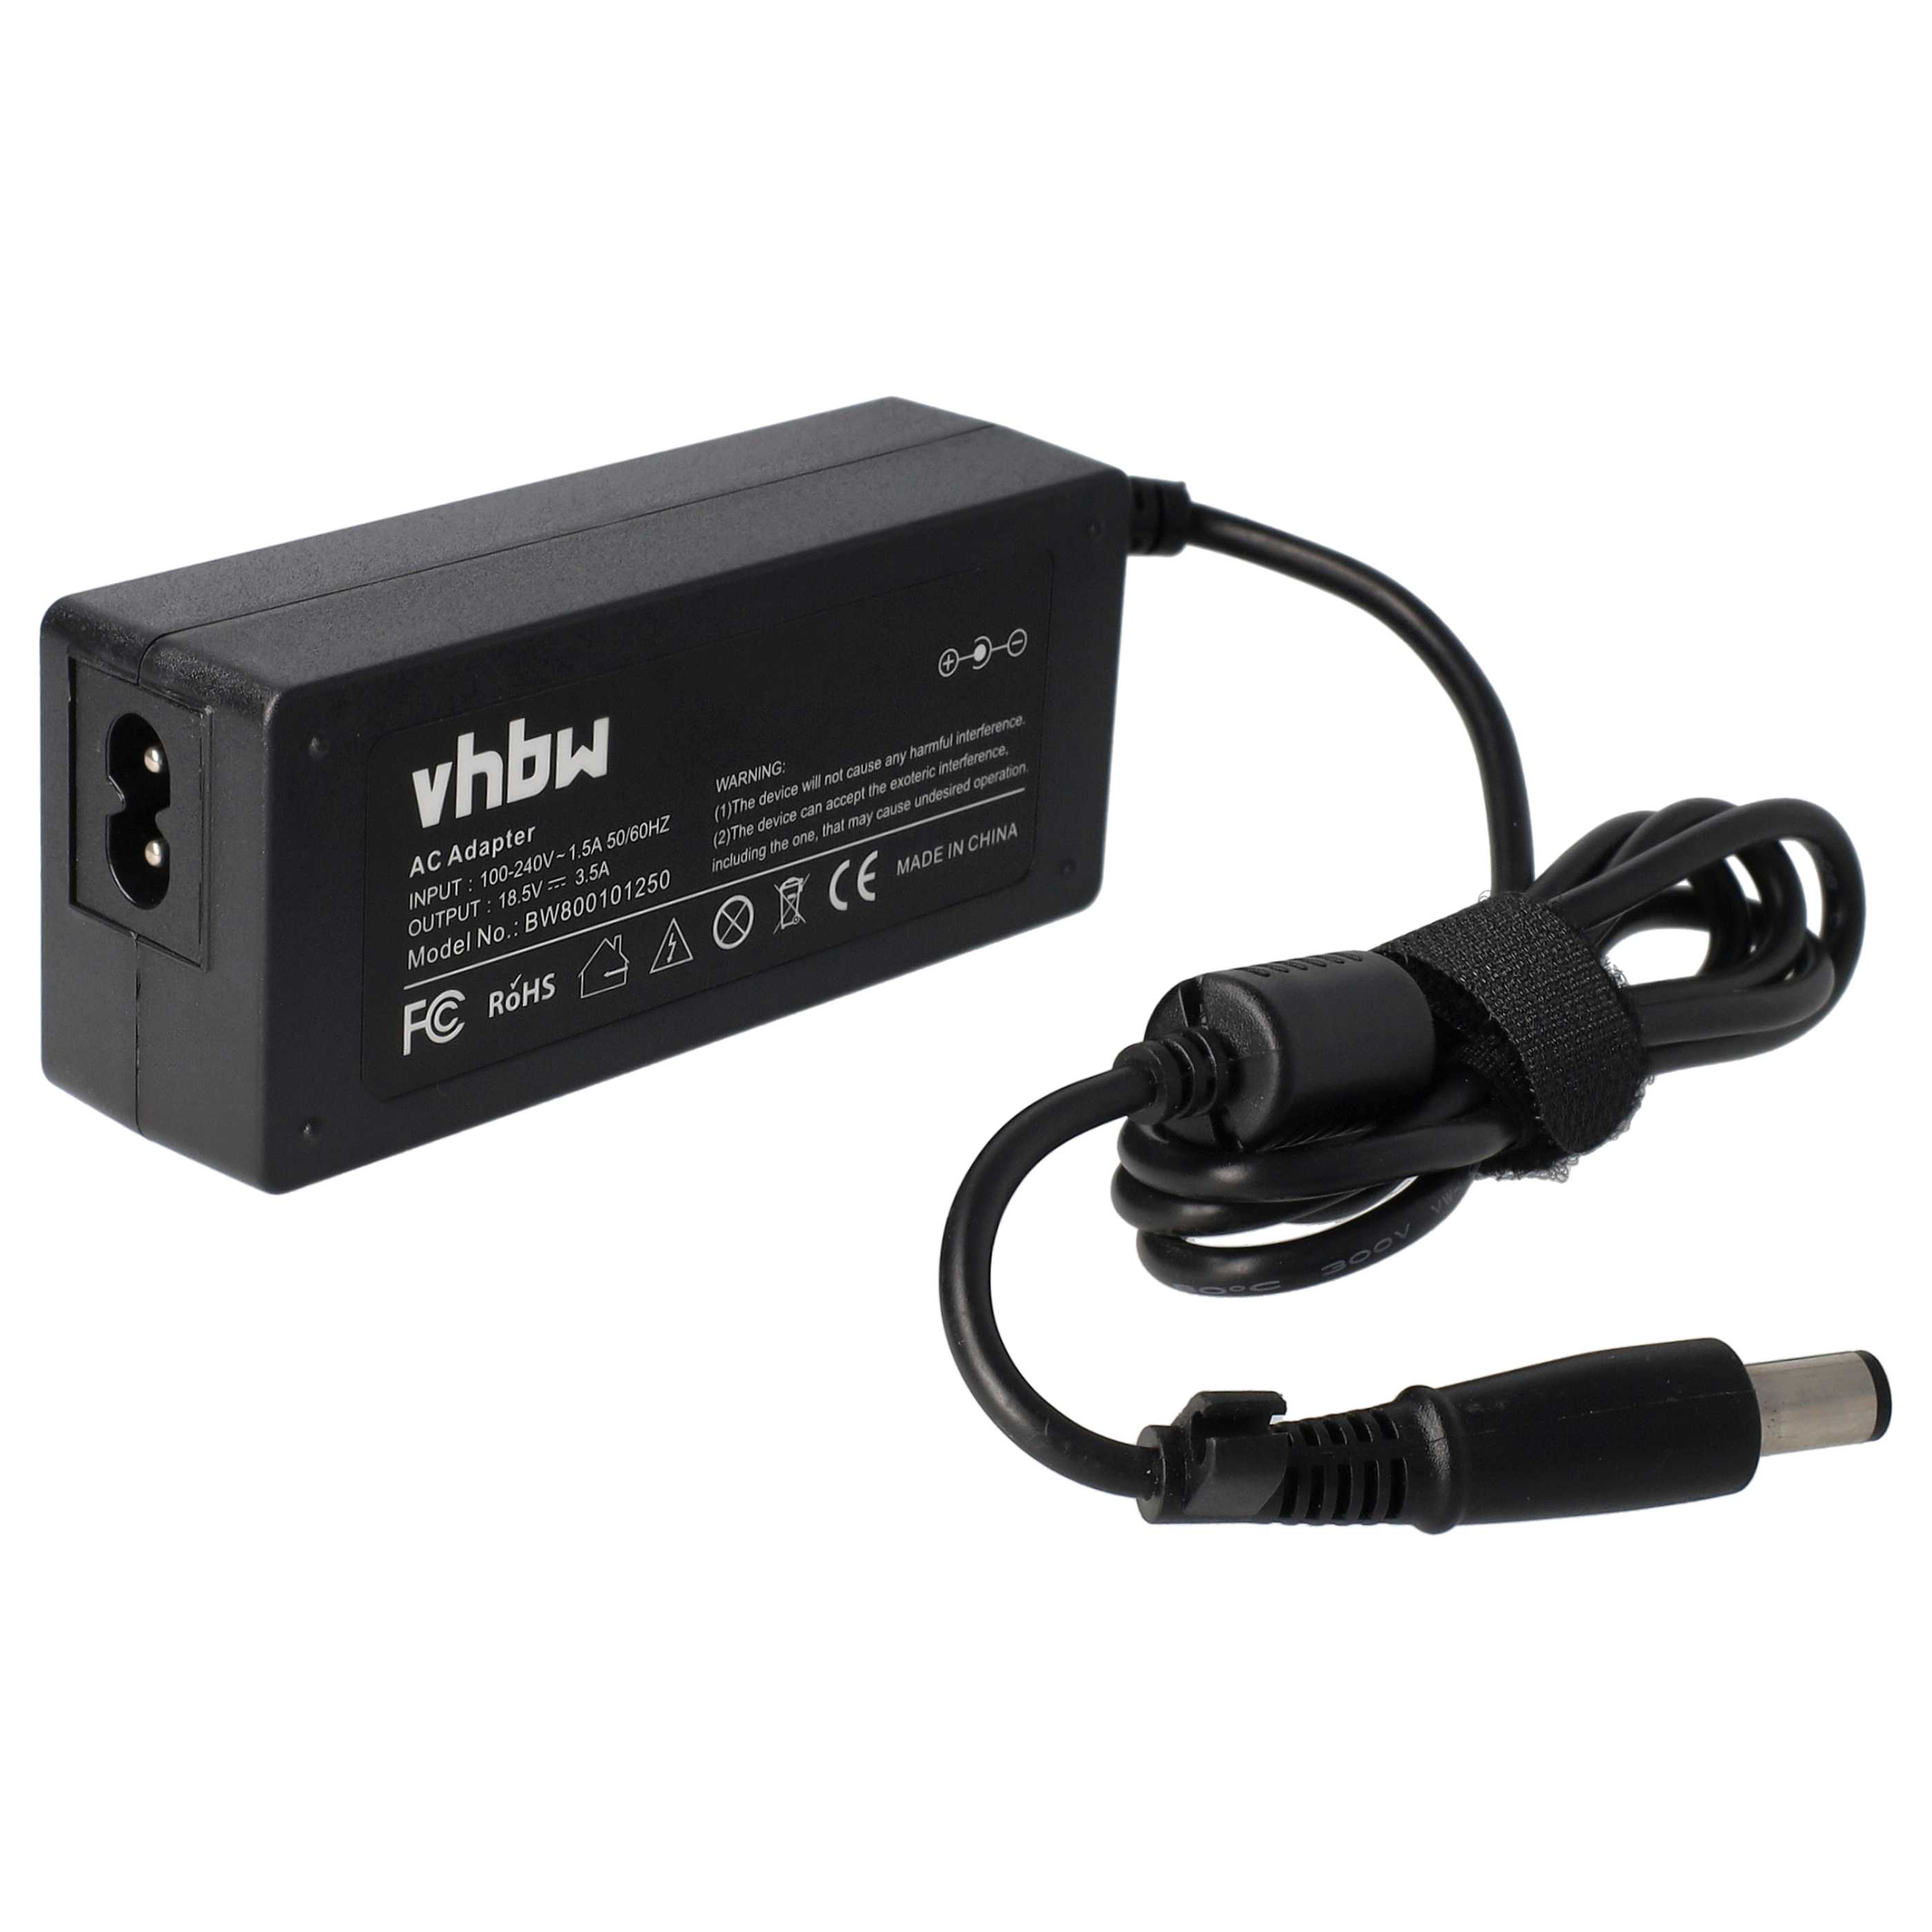 Mains Power Adapter replaces HP 382021-002, 384021-001, AP091F13LF, P/N 391173-001 for HPNotebook etc., 65 W